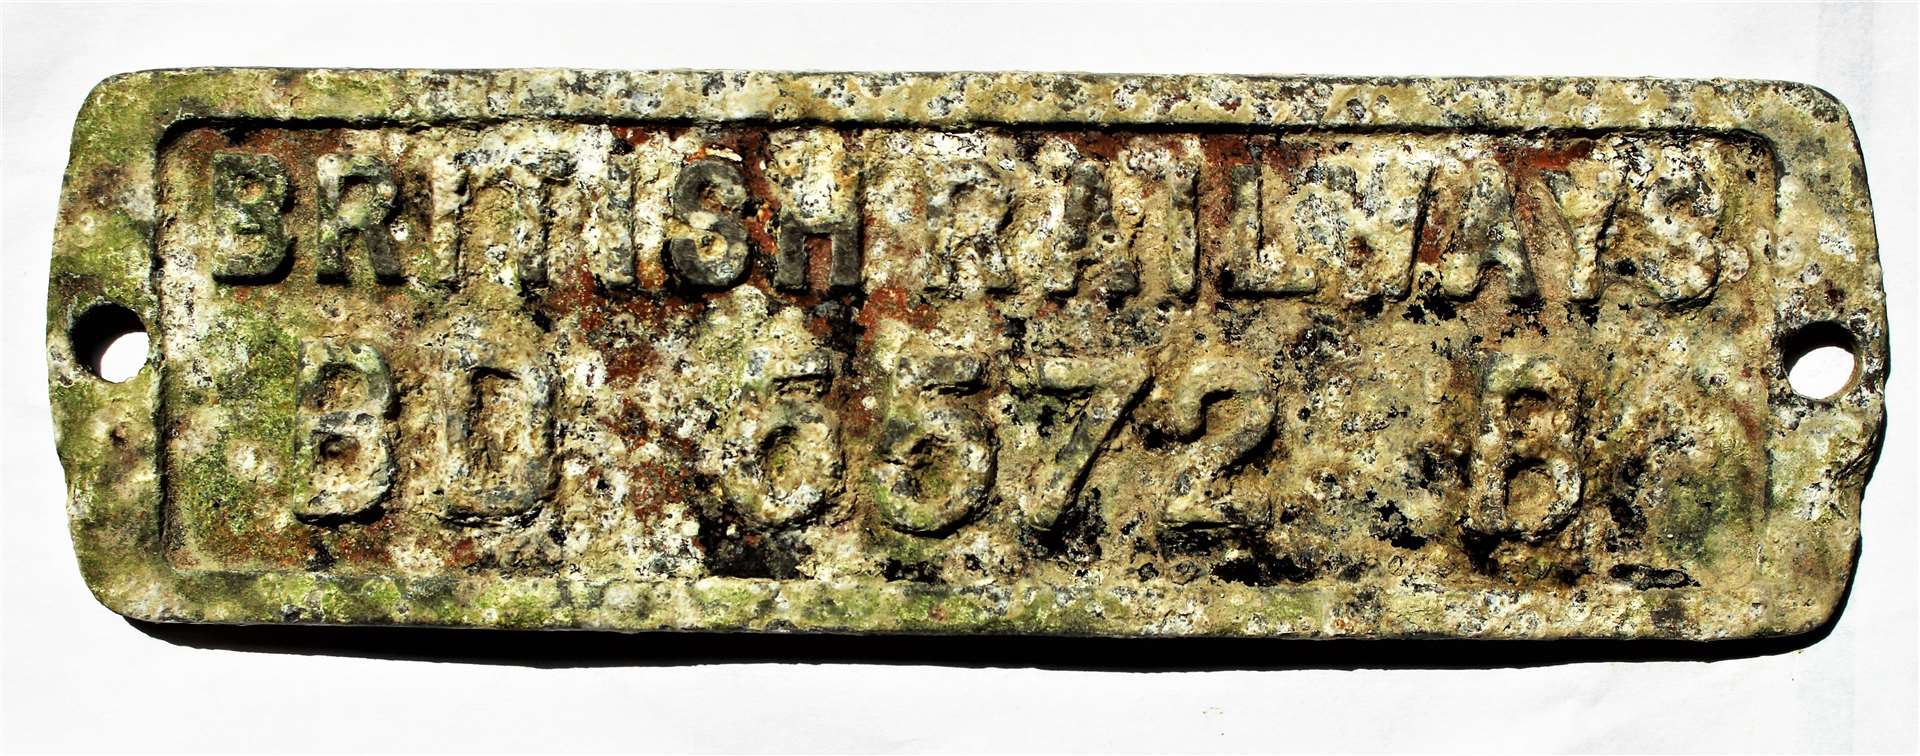 Another picture of the railway wagon plate that David Shand discovered near Wick. Pictures: David Shand